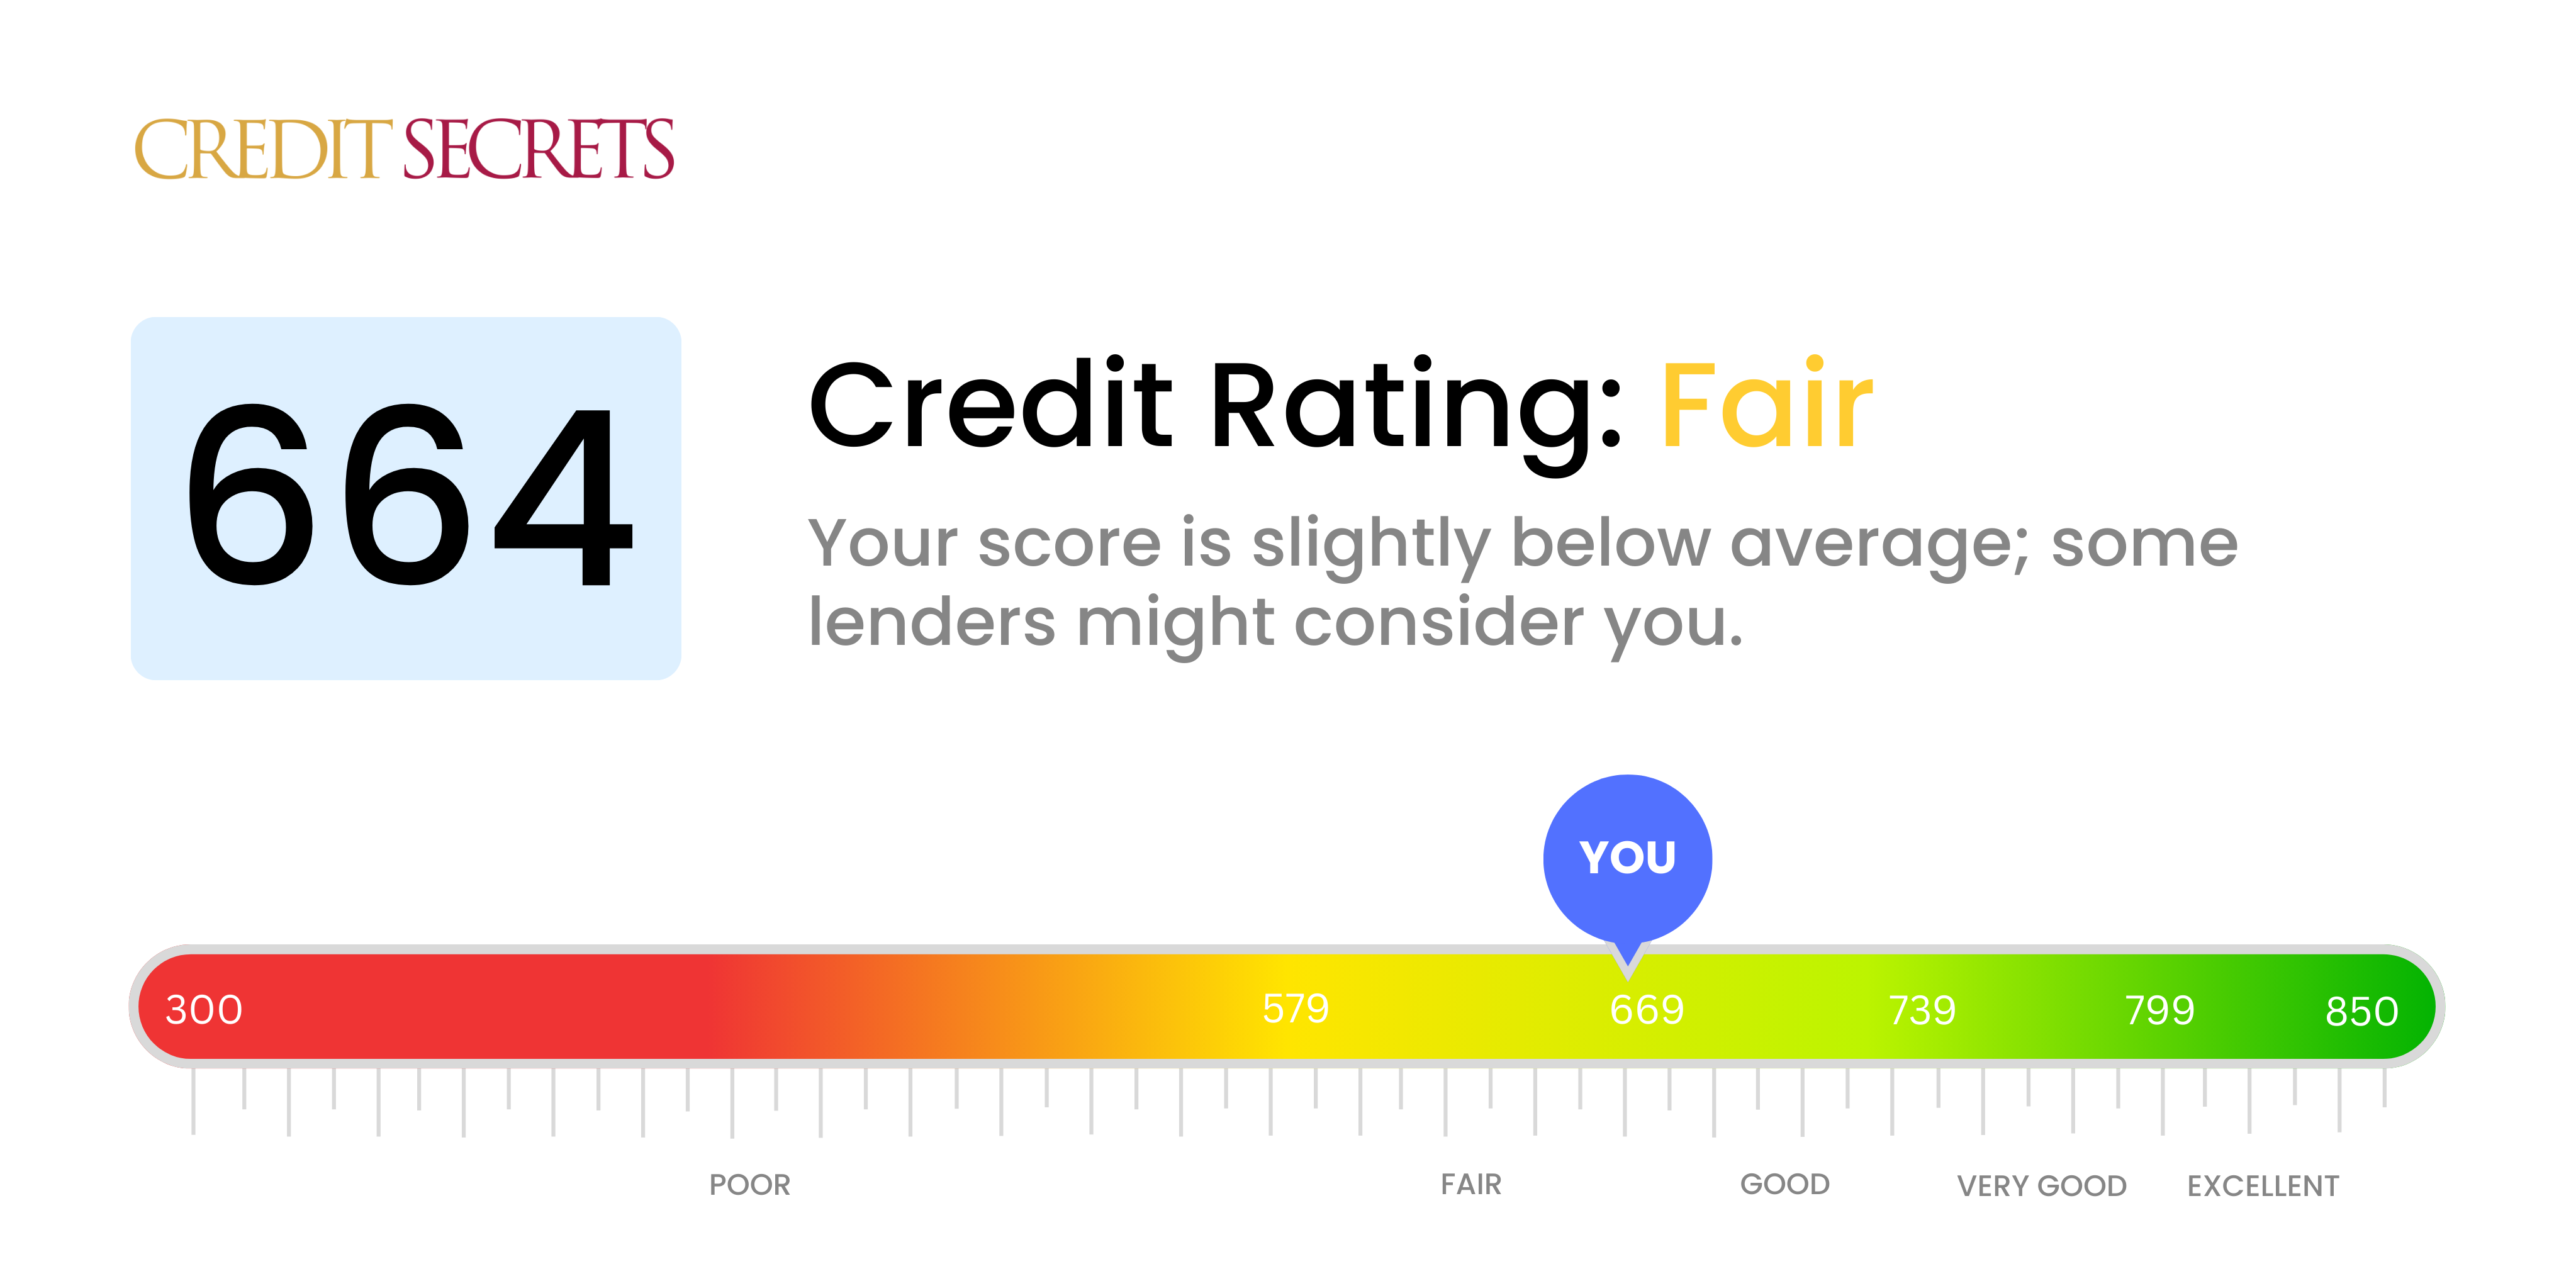 Is 664 a good credit score?